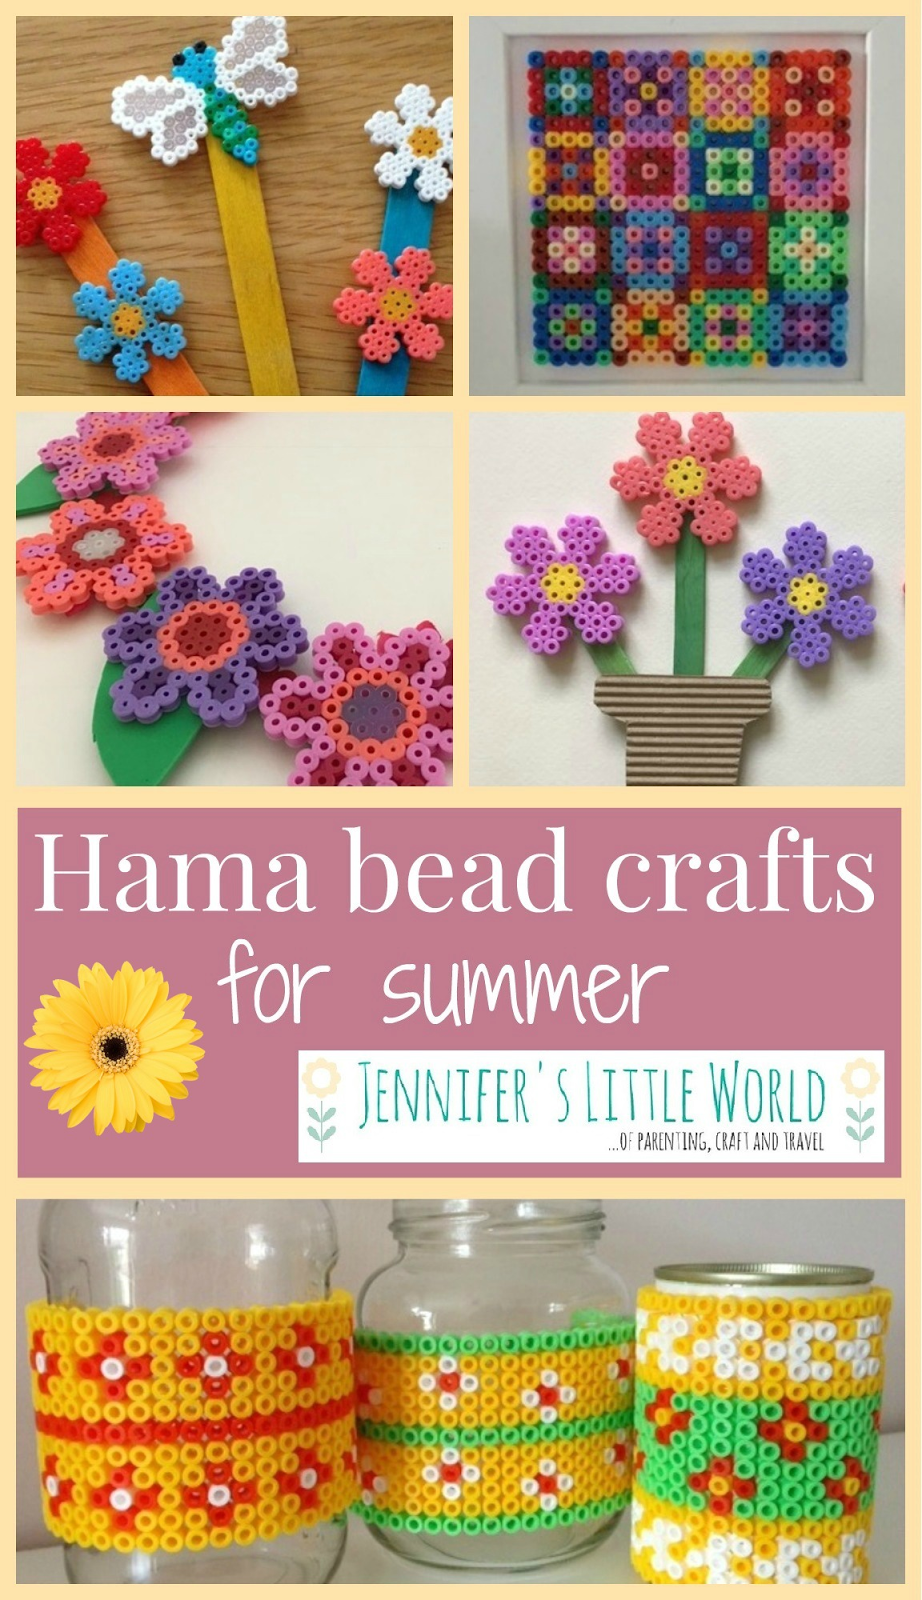 Flower Frame Kids Craft with Perler Beads - Crafting Cheerfully